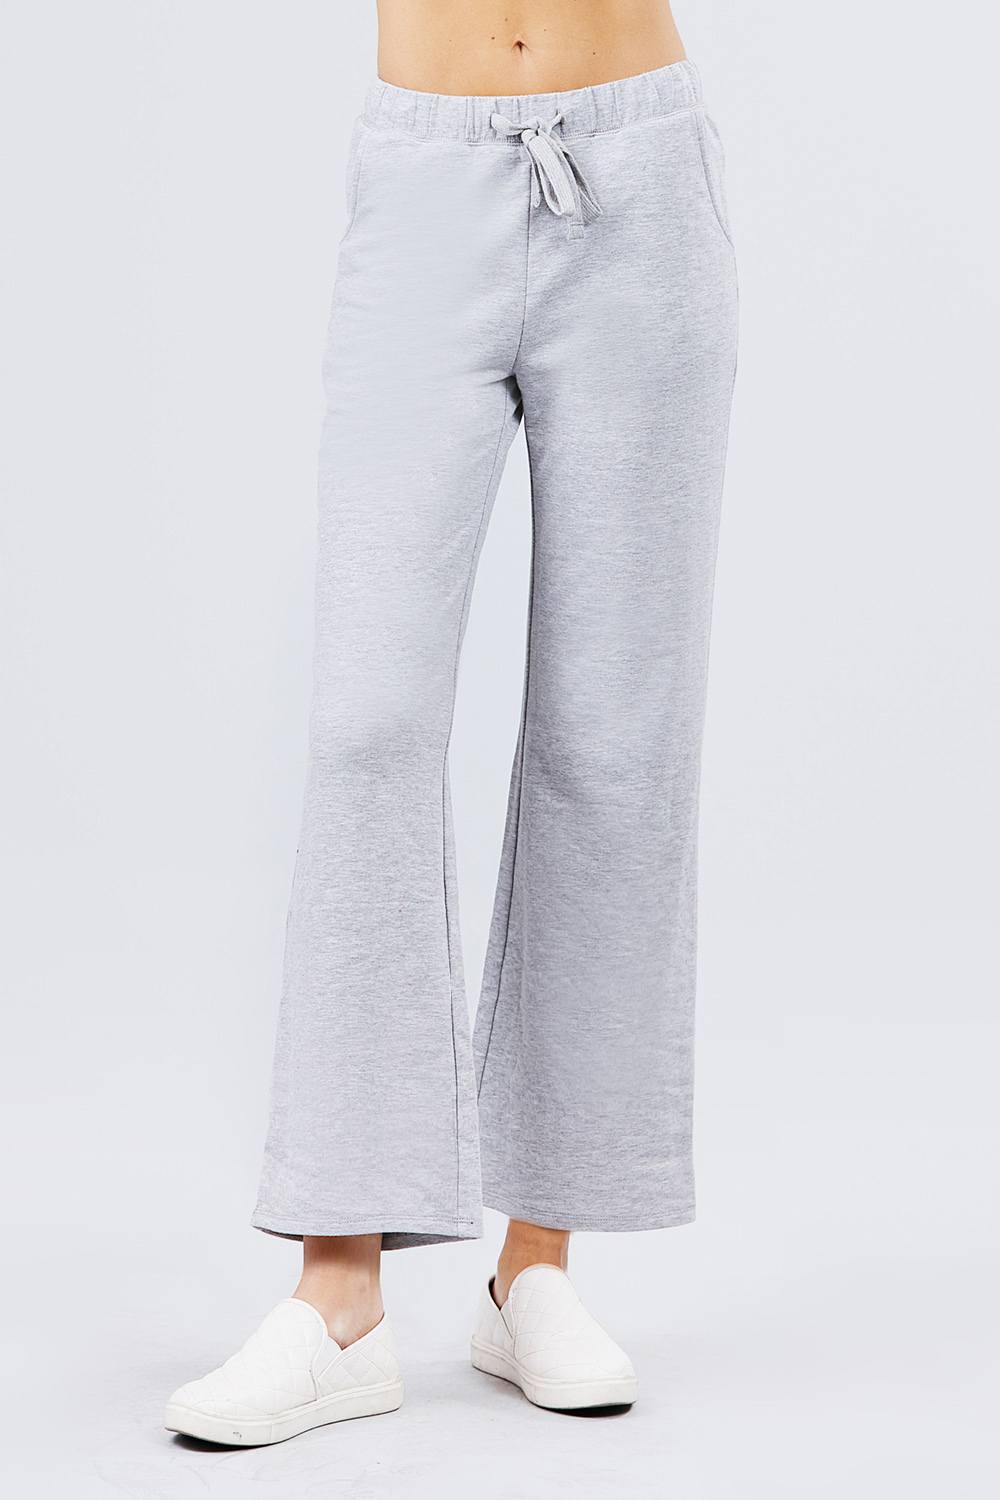 Our Best Cotton/Polyester/Spandex Blend French Terry Long Pants (Heather Grey)